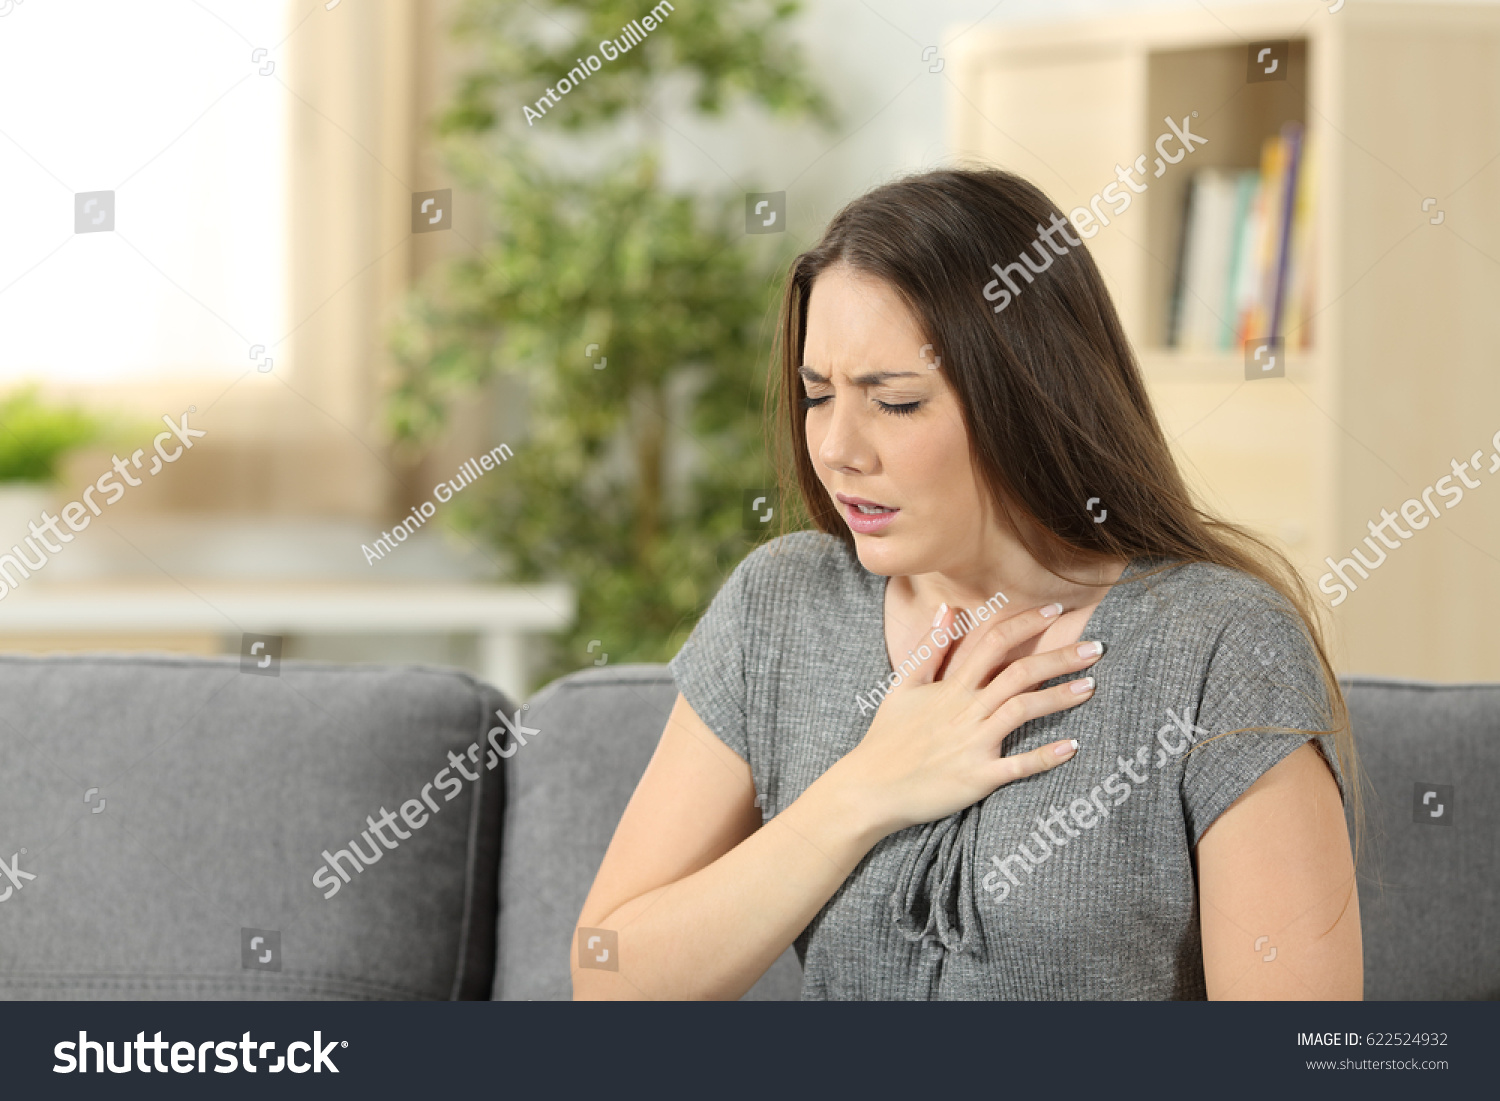 Woman suffering respiration problems sitting on a couch in the living room at home #622524932